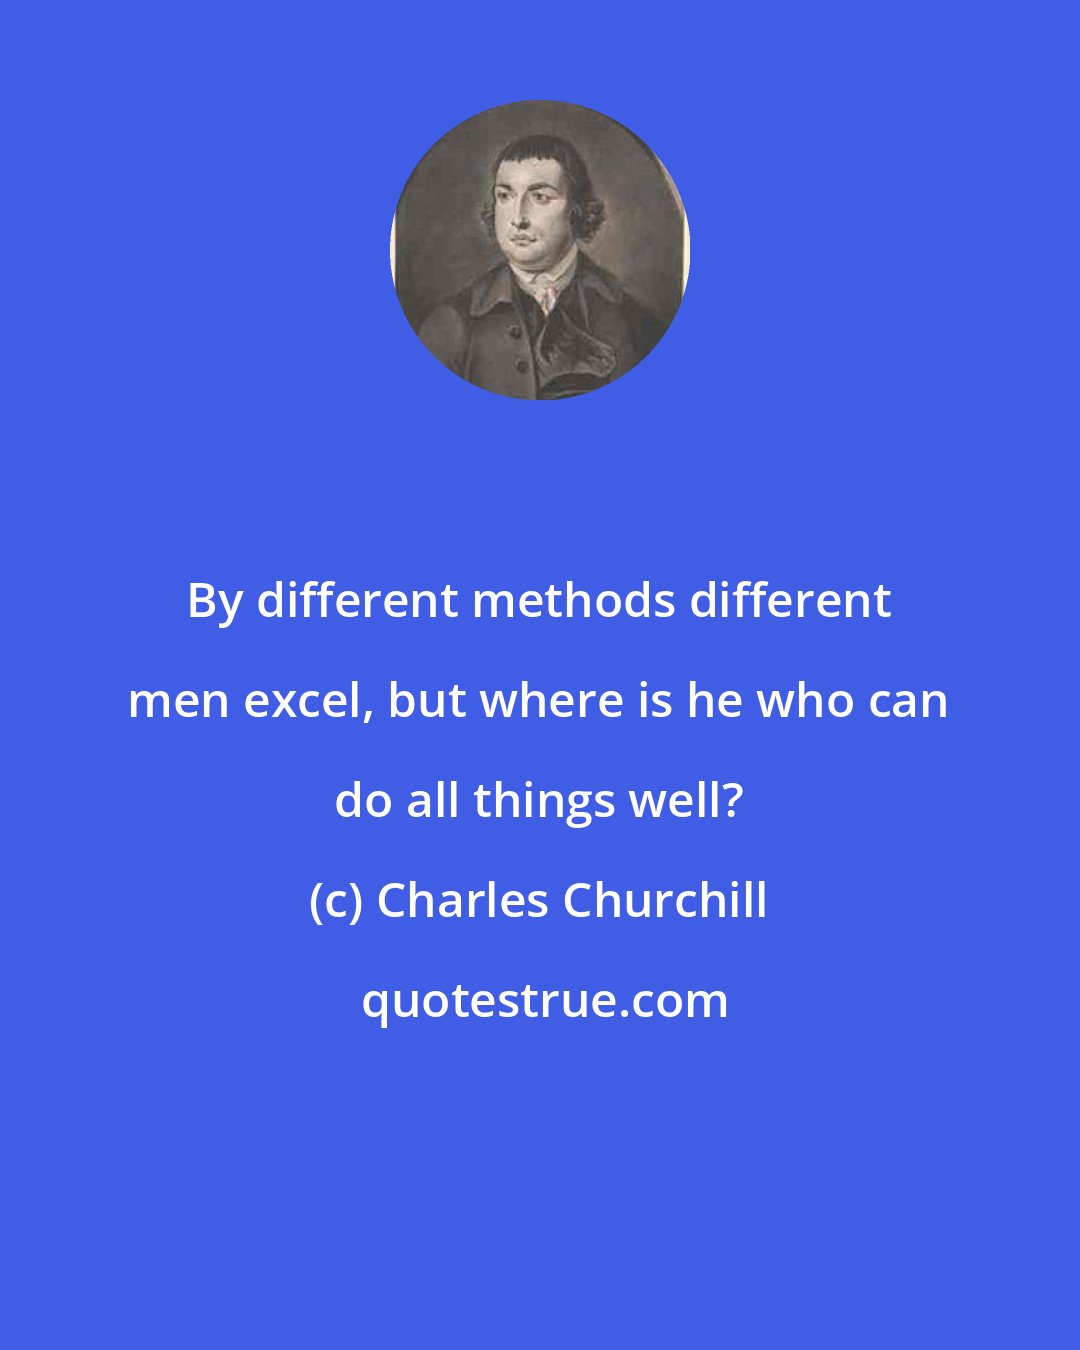 Charles Churchill: By different methods different men excel, but where is he who can do all things well?